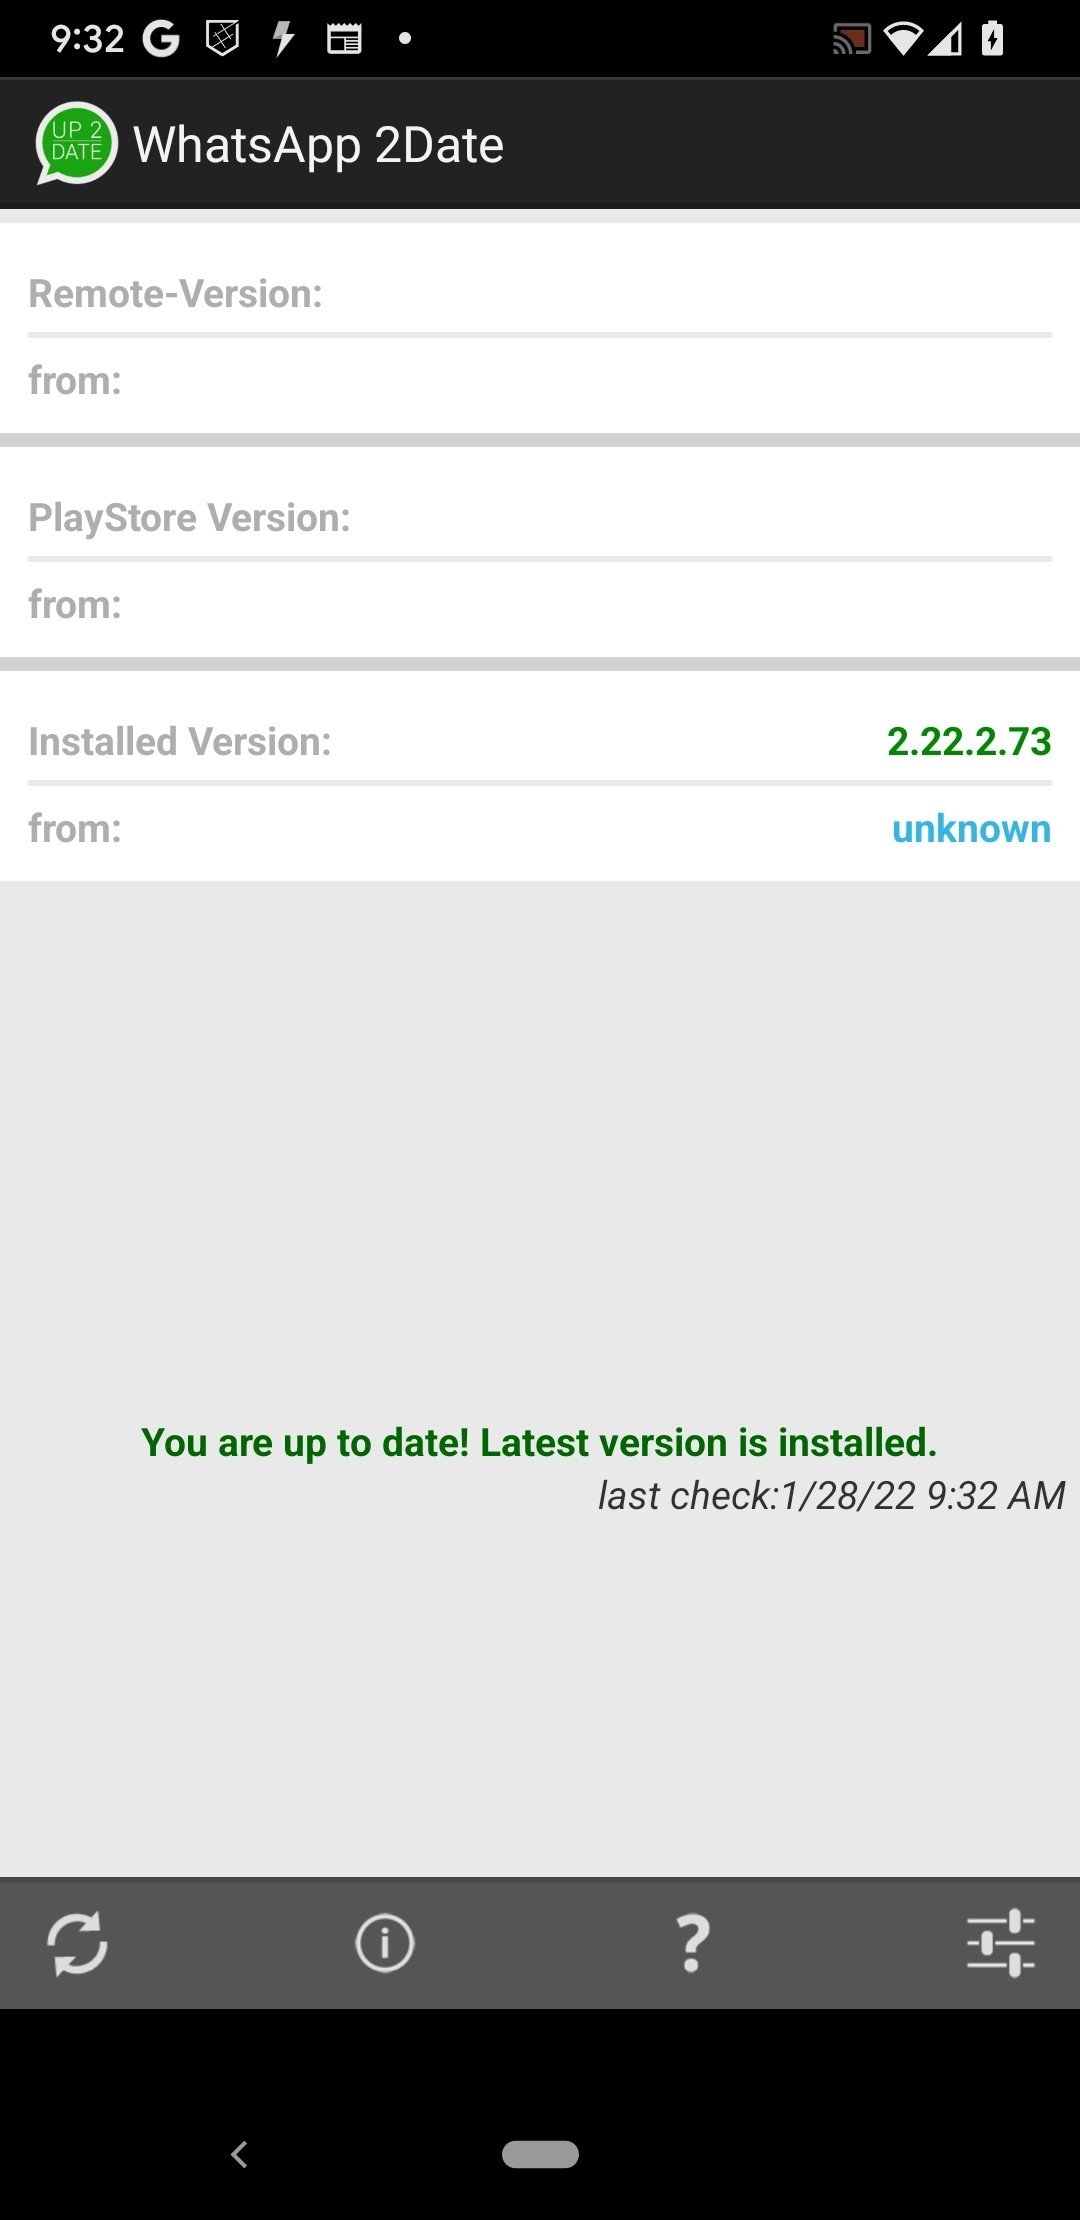 WhatsApp 2Date Android